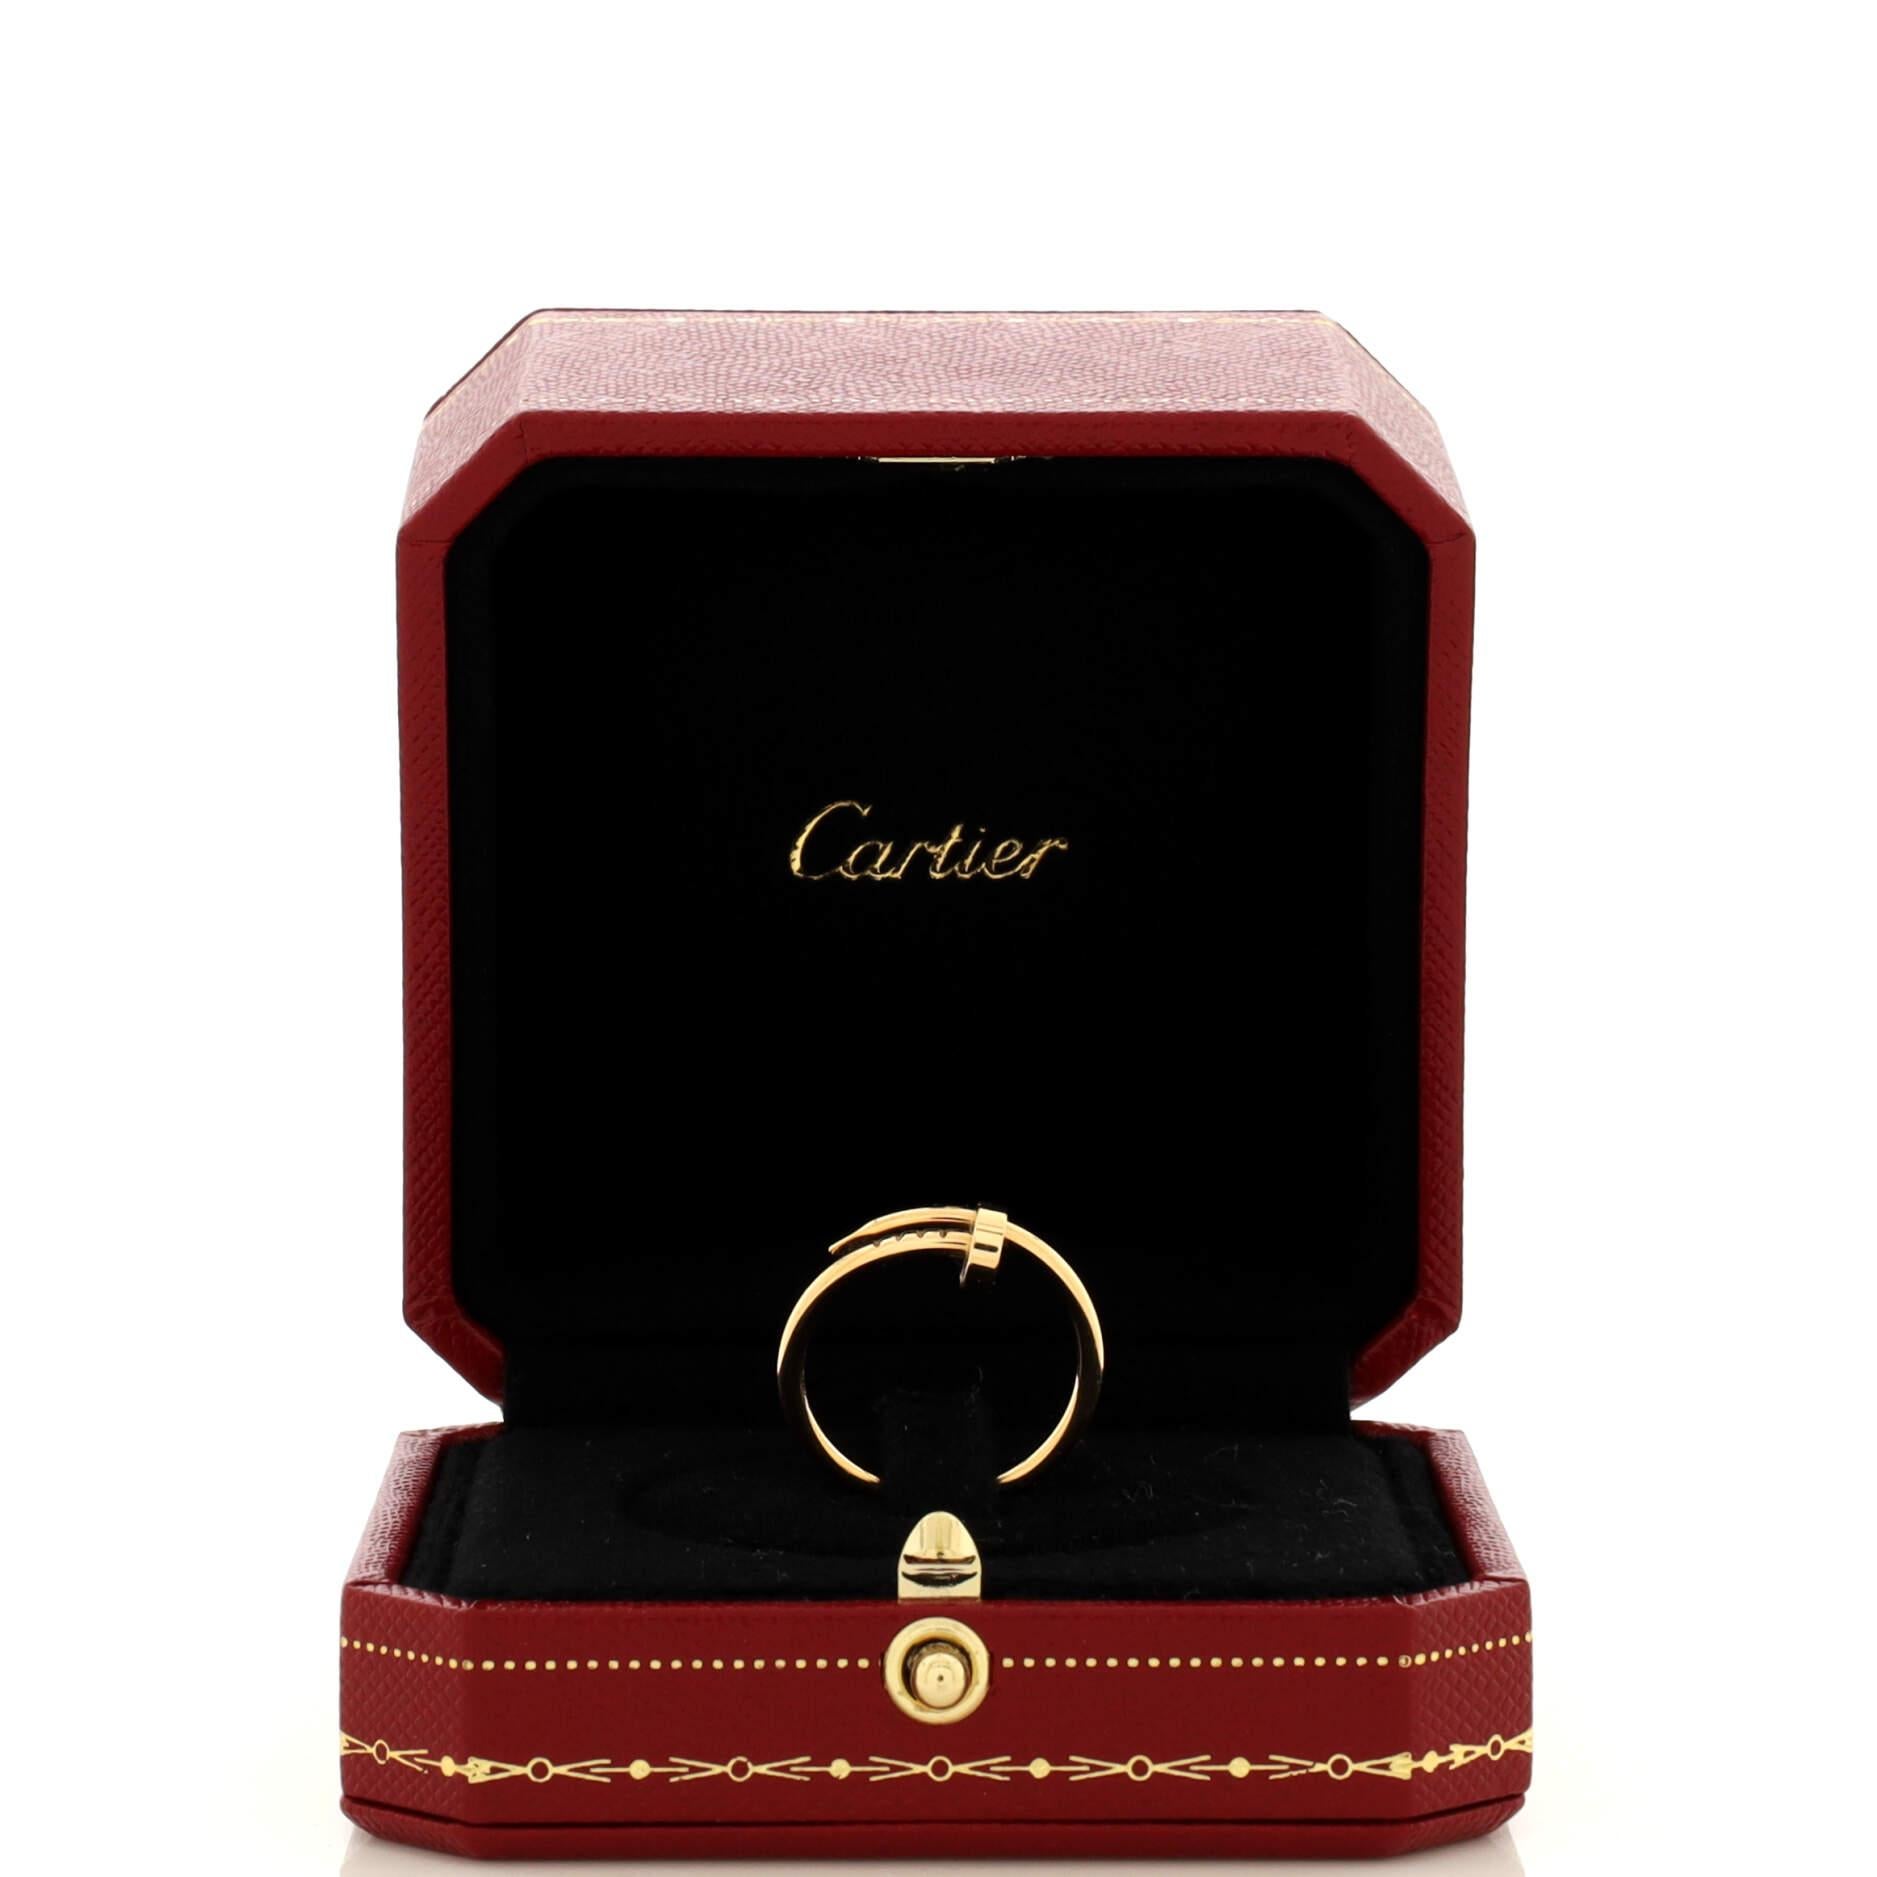 Condition: Excellent. Minor wear throughout.
Accessories: No Accessories
Measurements: Size: 6.75 - 54, Width: 1.80 mm
Designer: Cartier
Model: Juste un Clou Ring 18K Yellow Gold Small
Exterior Color: Yellow Gold
Item Number: 225163/1